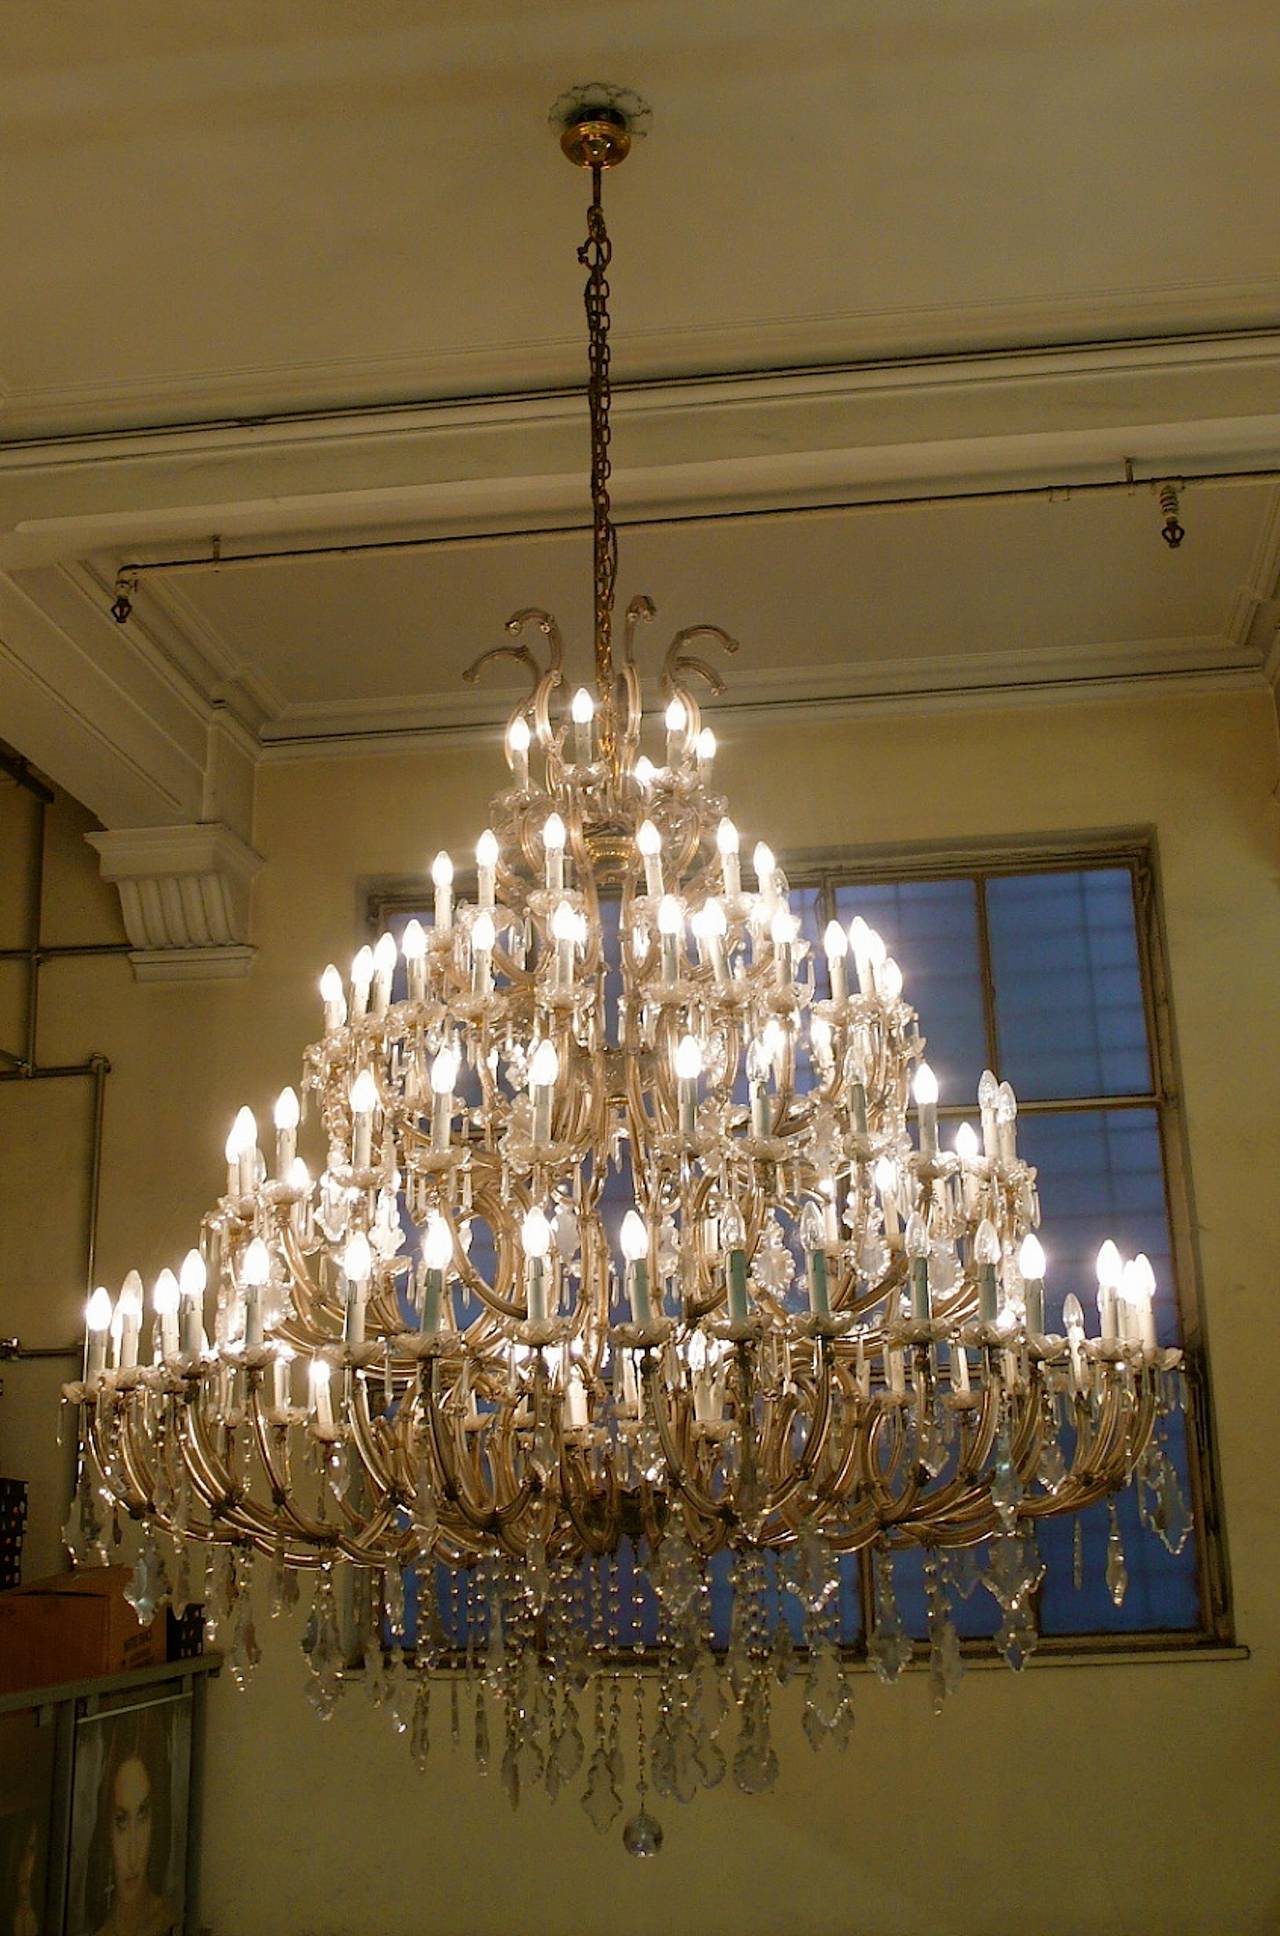 Giant original pair of chandeliers  Maria Theresa
HEIGHT:
200 cm without chain